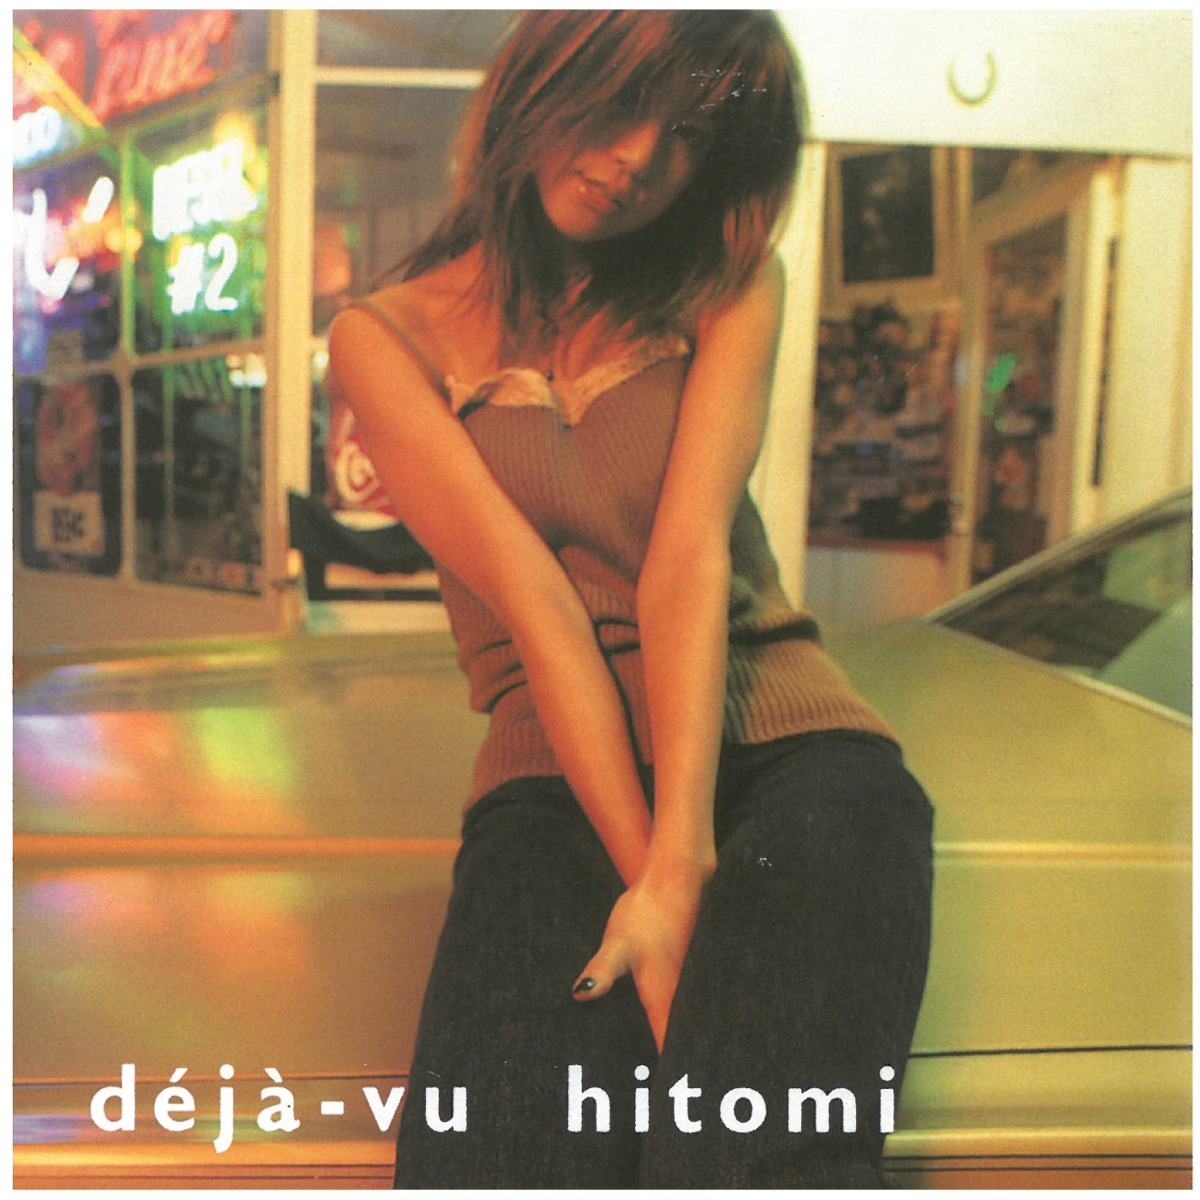 【SALE／90%OFF】 低価格で大人気の hitomi ヒトミ deja-vu CD bee-learning.cm bee-learning.cm